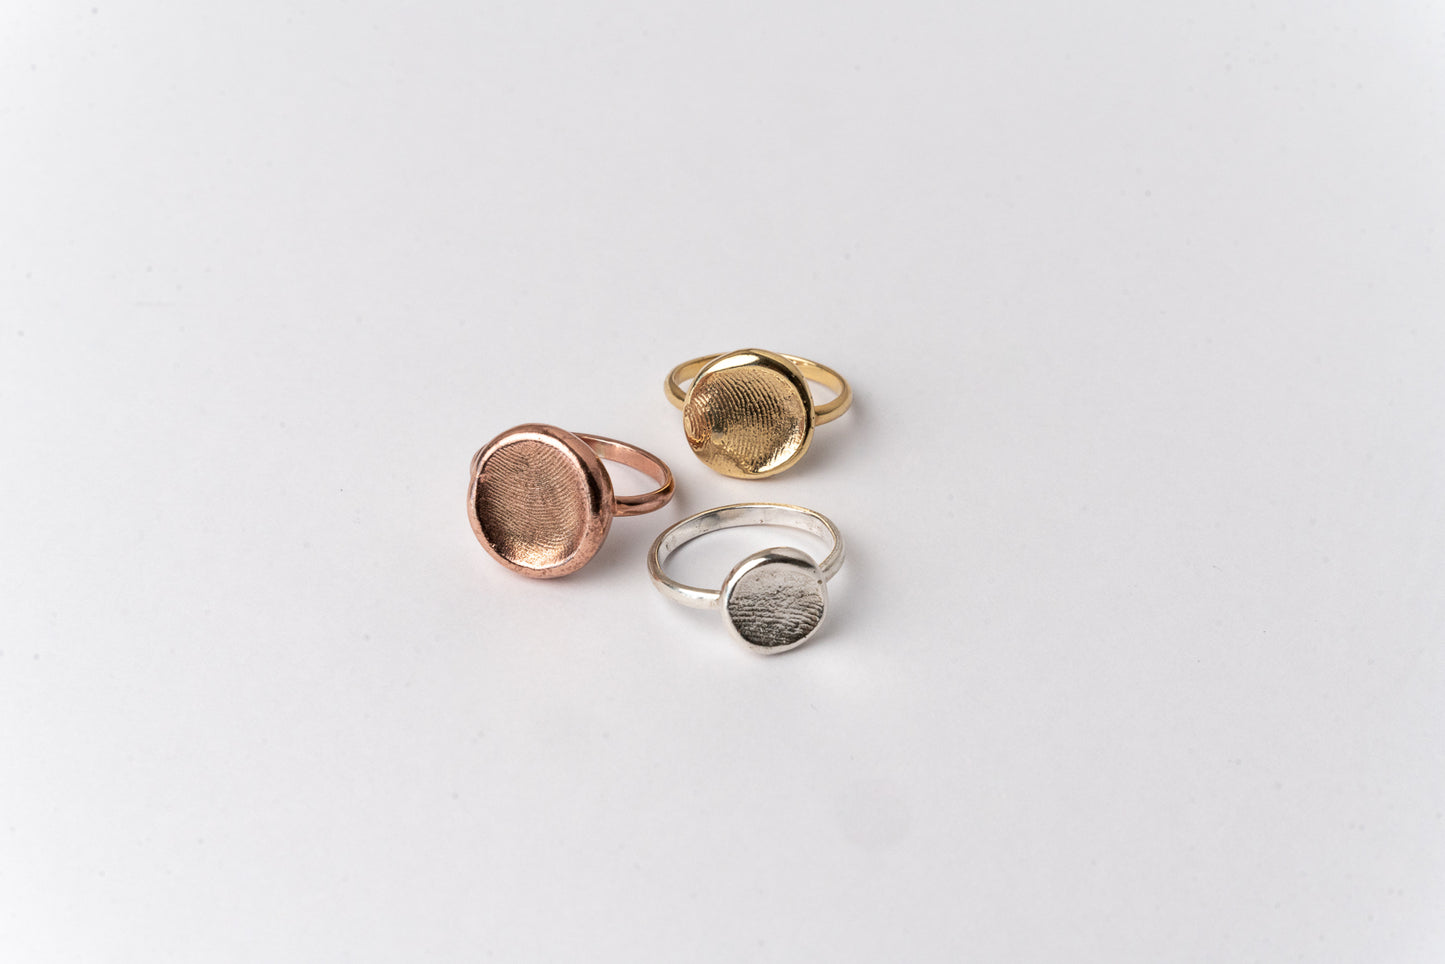 Three ROHO Heritage Jewellery fingerprint impression rings in silver, yellow gold and rose gold, displayed on a clean white background.